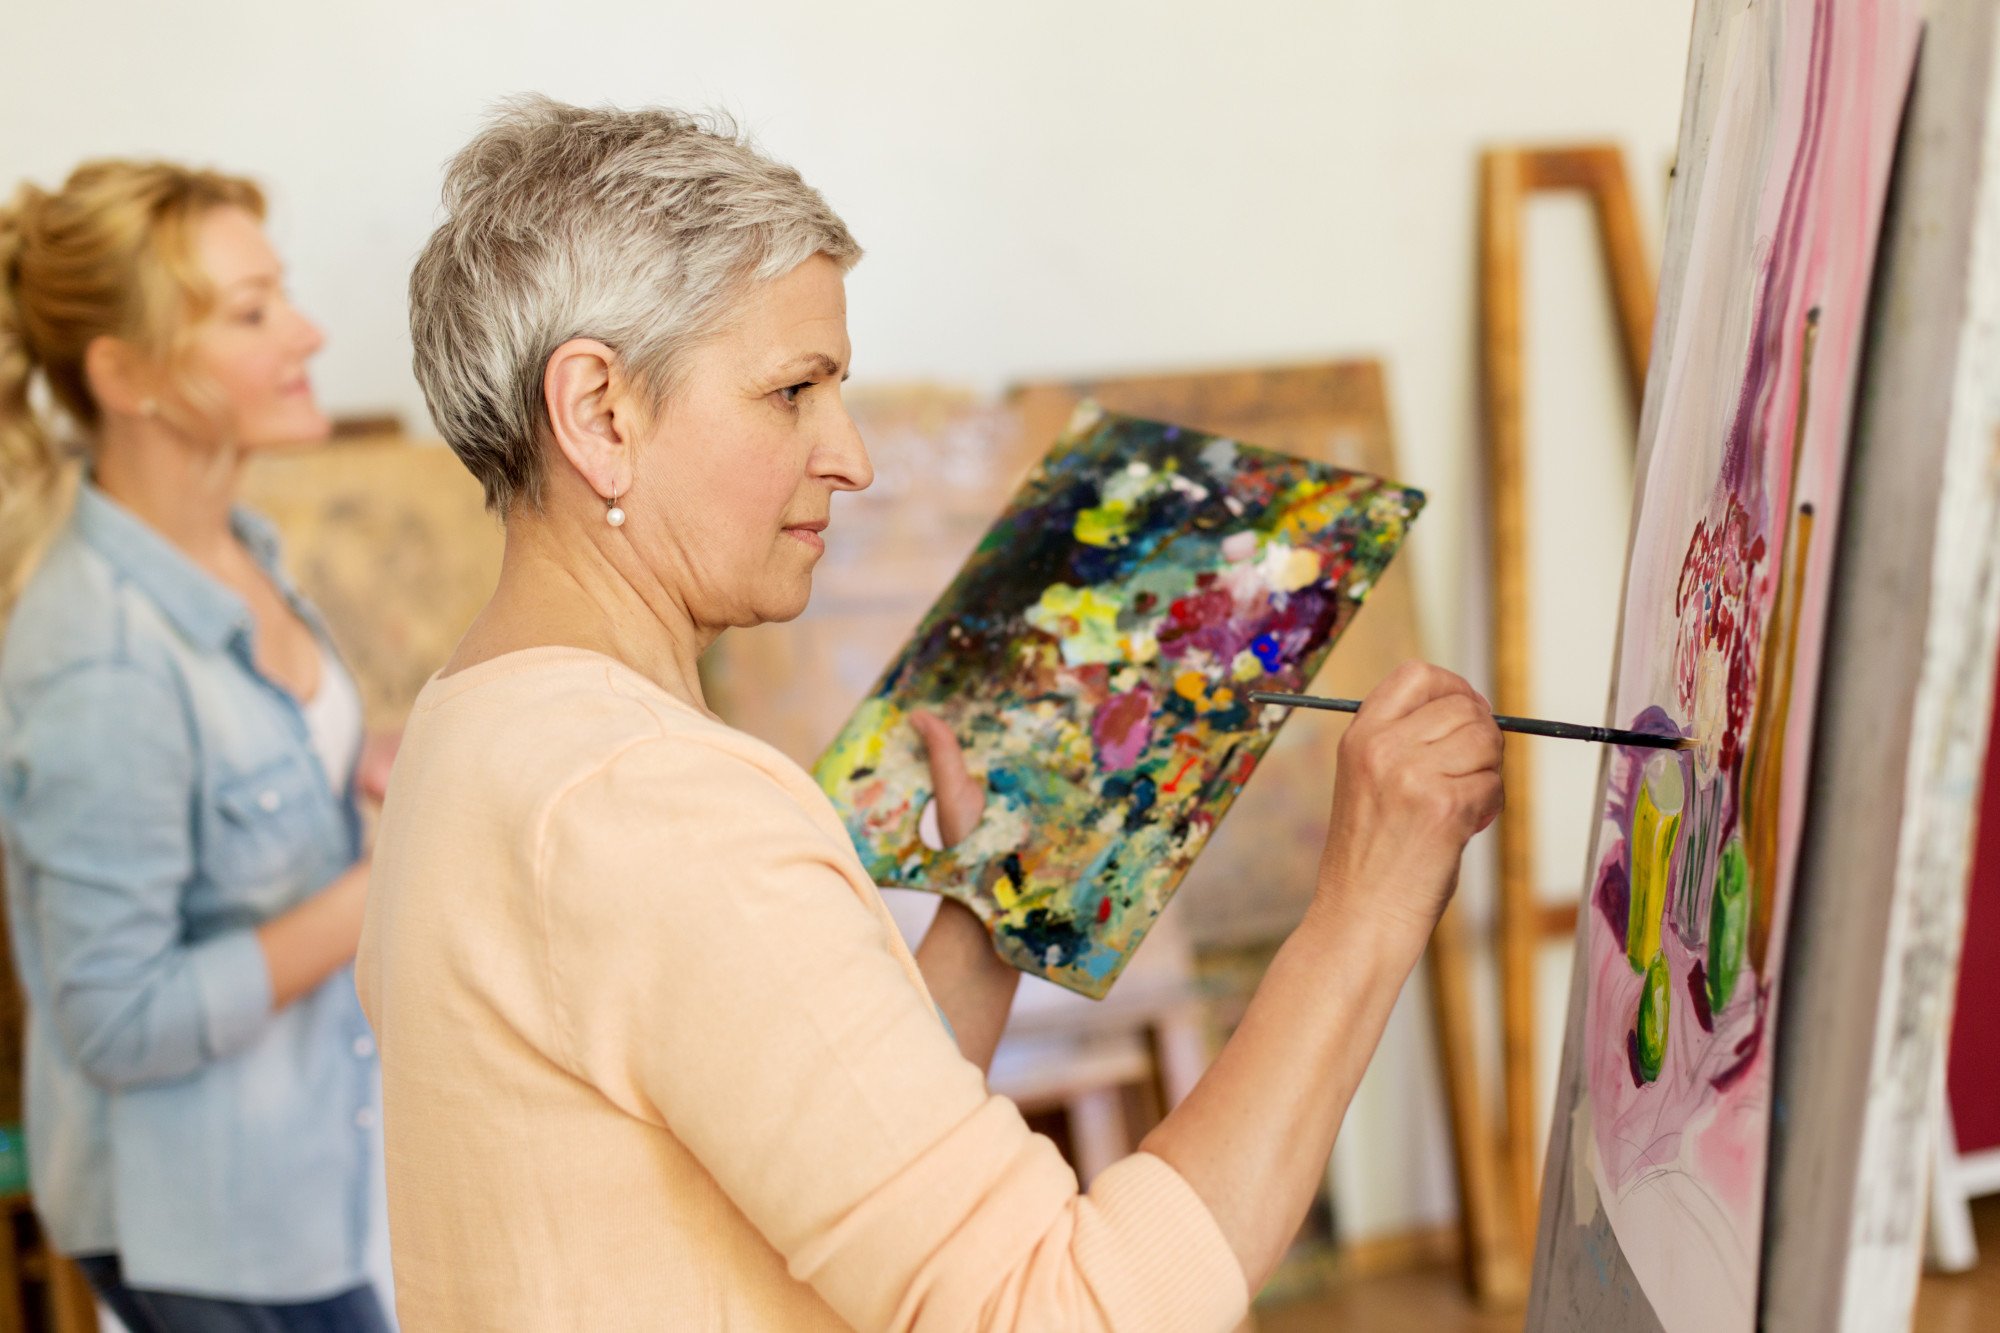 Arts and crafts for seniors - Memory Lane Therapy